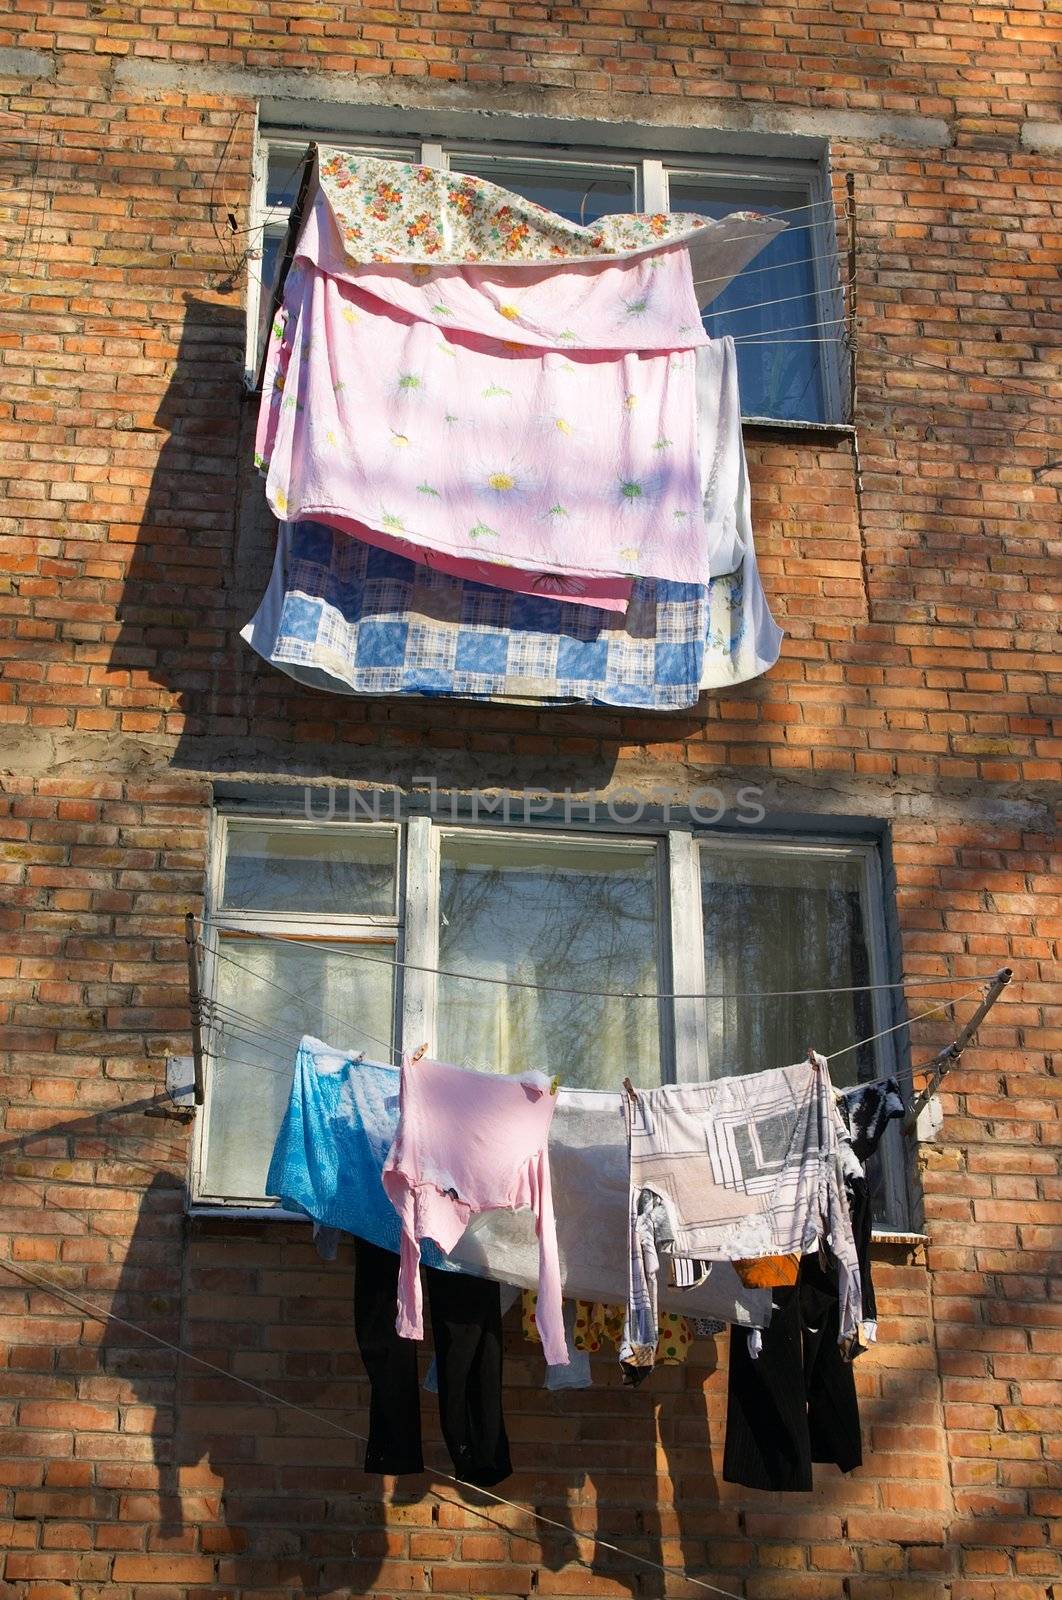 Washed clothes drying on the rope